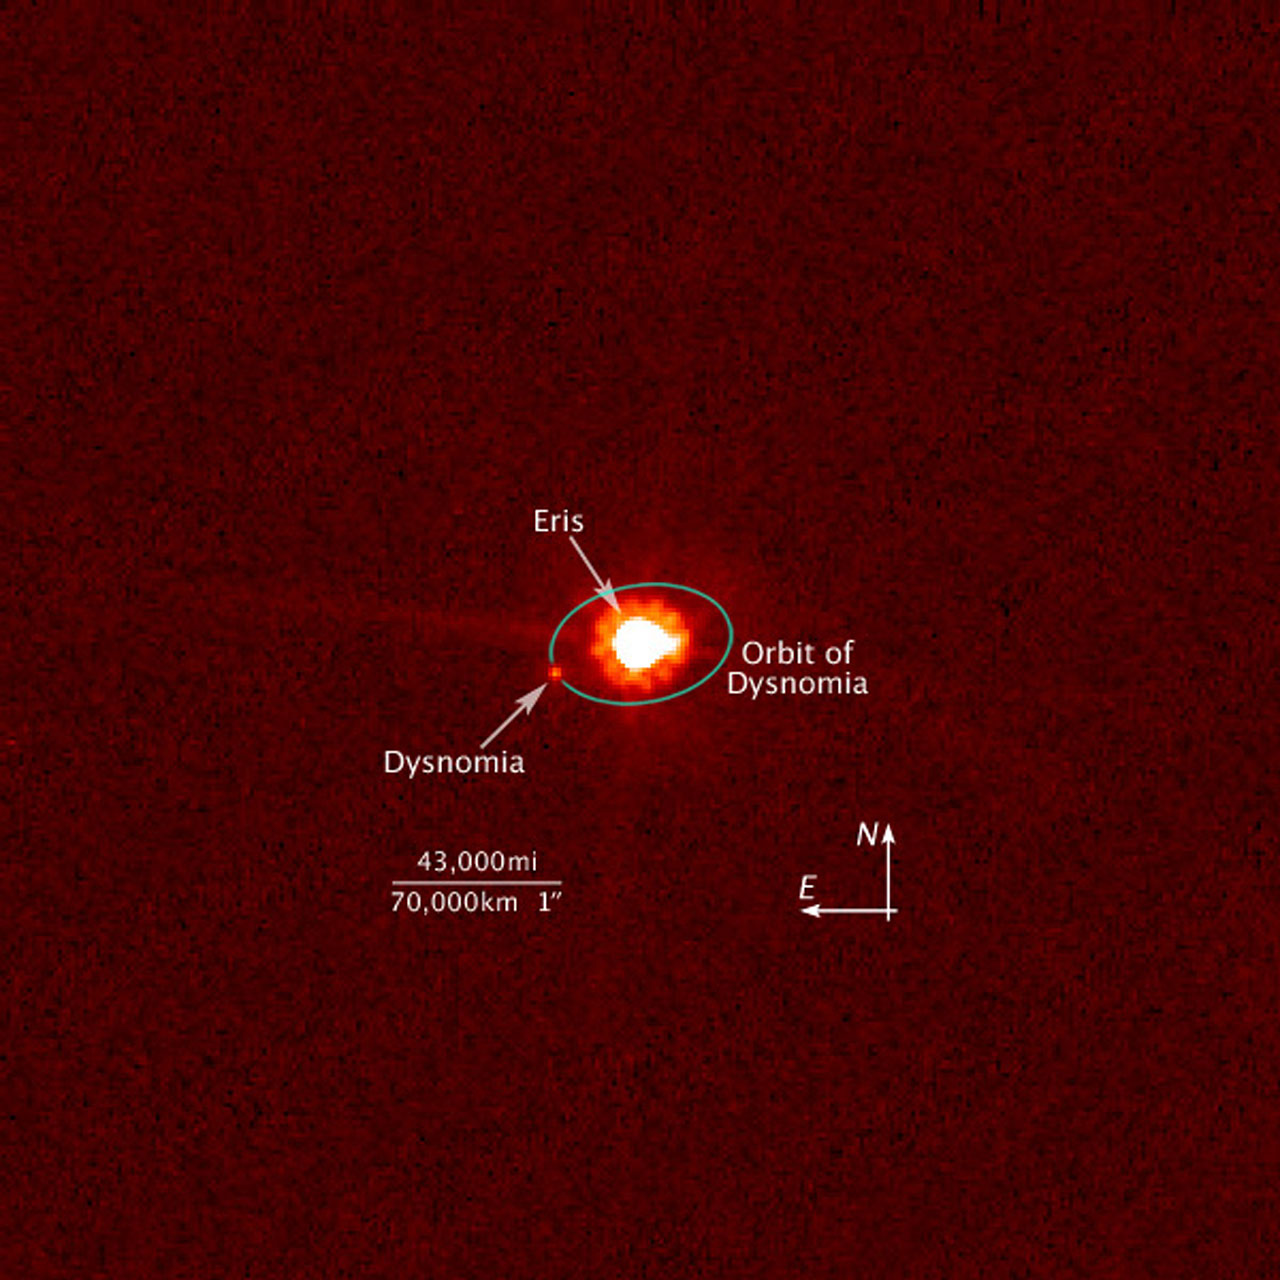 This is an image of the dwarf planet Eris (centre) and its satellite Dysnomia (at 9 o'clock position) taken with NASA/ESA's Hubble Space Telescope on Aug. 30, 2006.